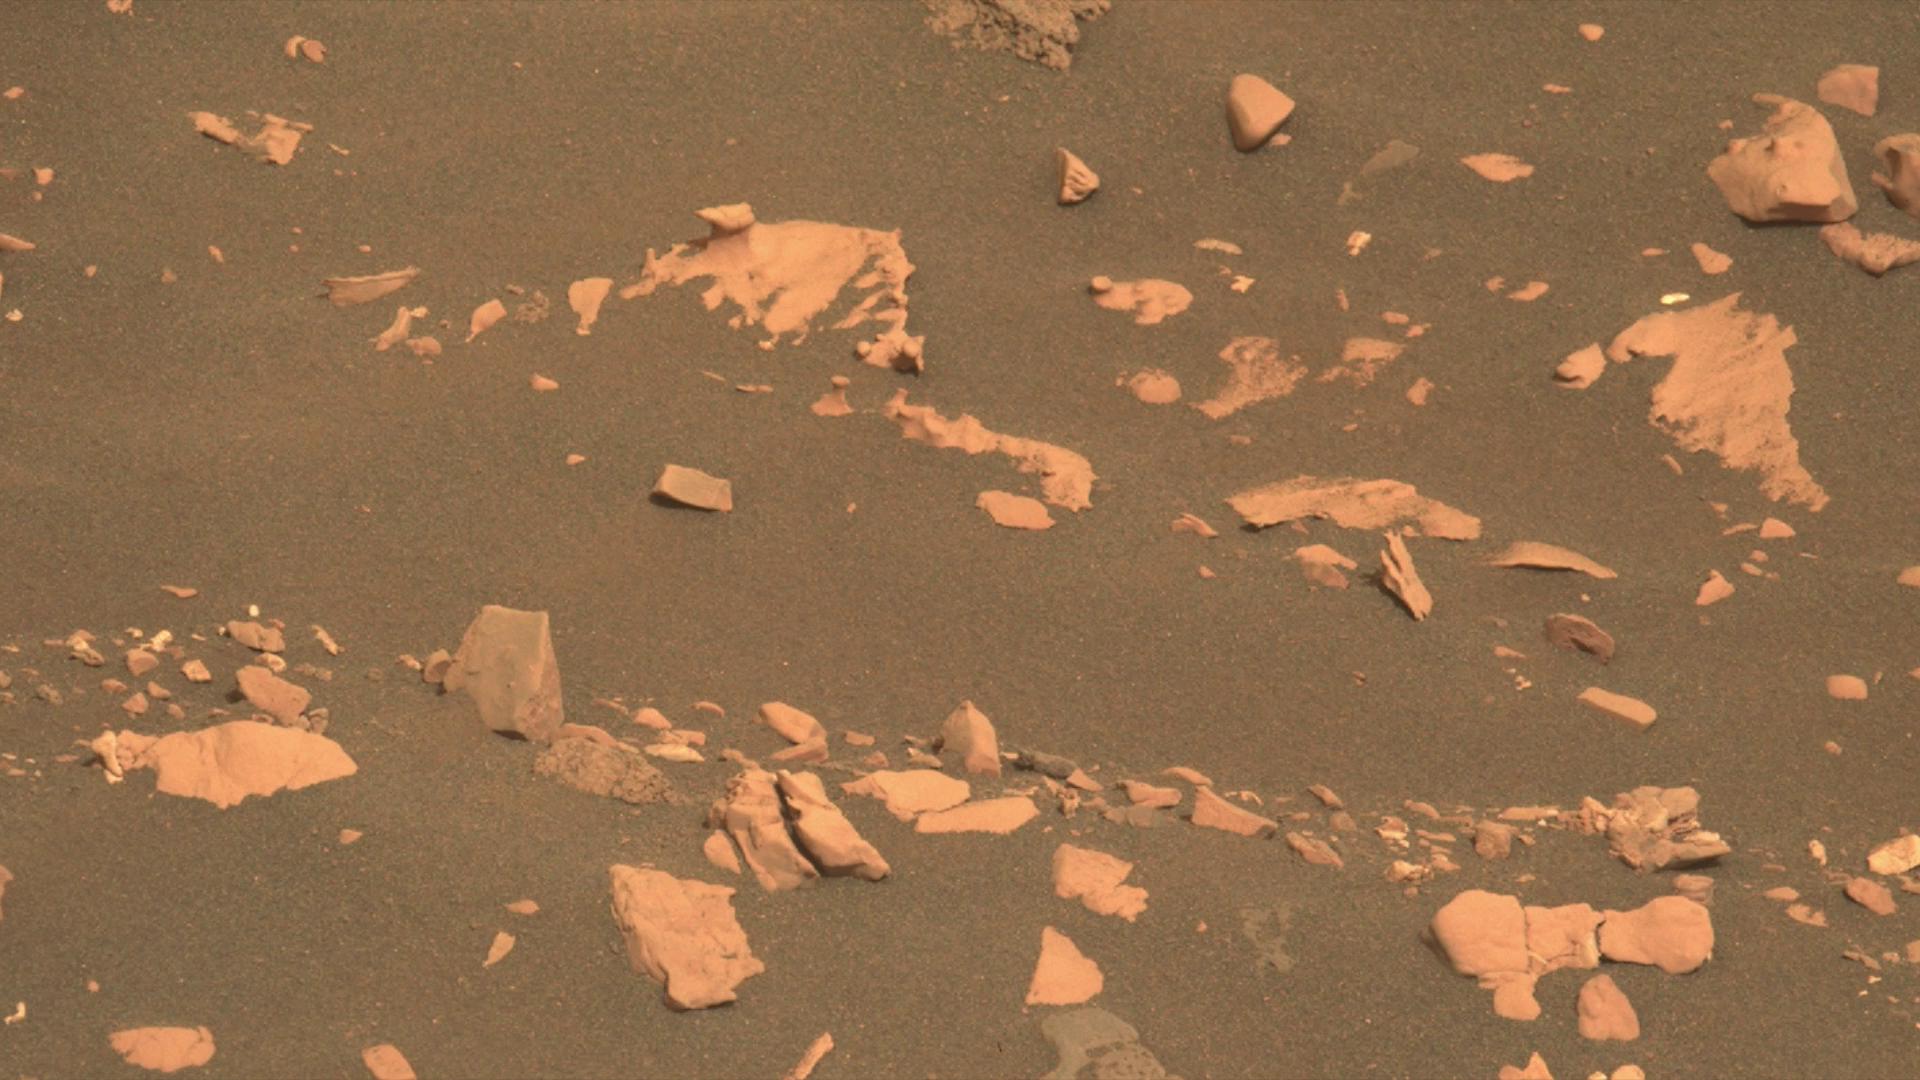 slide 4 - This image of a mushroom-shaped rock feature (top left) was acquired on June 13, 2022 (Sol 467) at the local mean solar time of 13:00:39 using the Mastcam-Z instrument. 